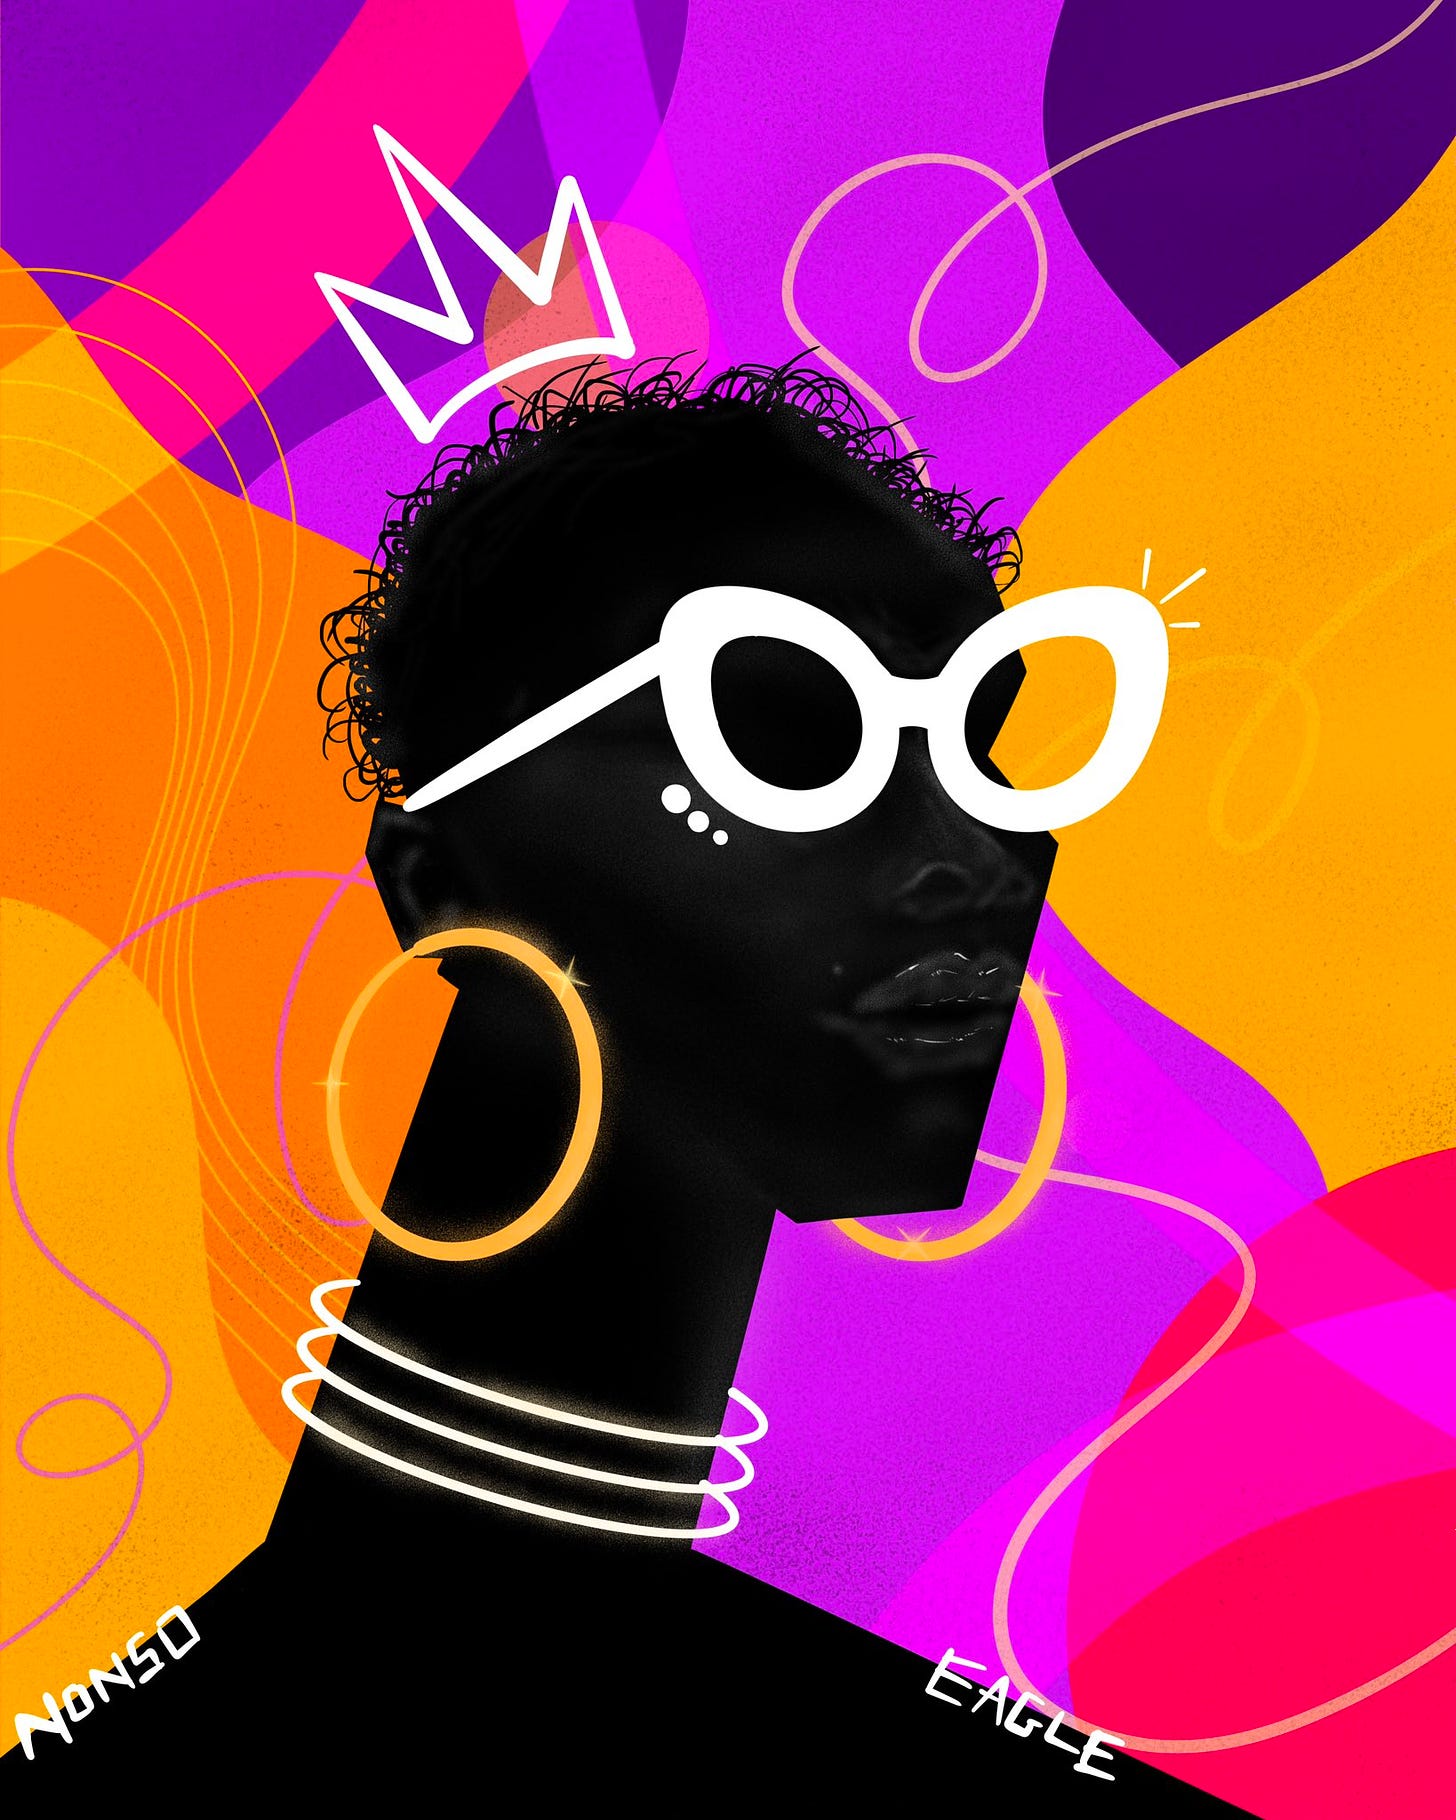 A colourful and expressive silhouette illustration by Nonso Eagle  